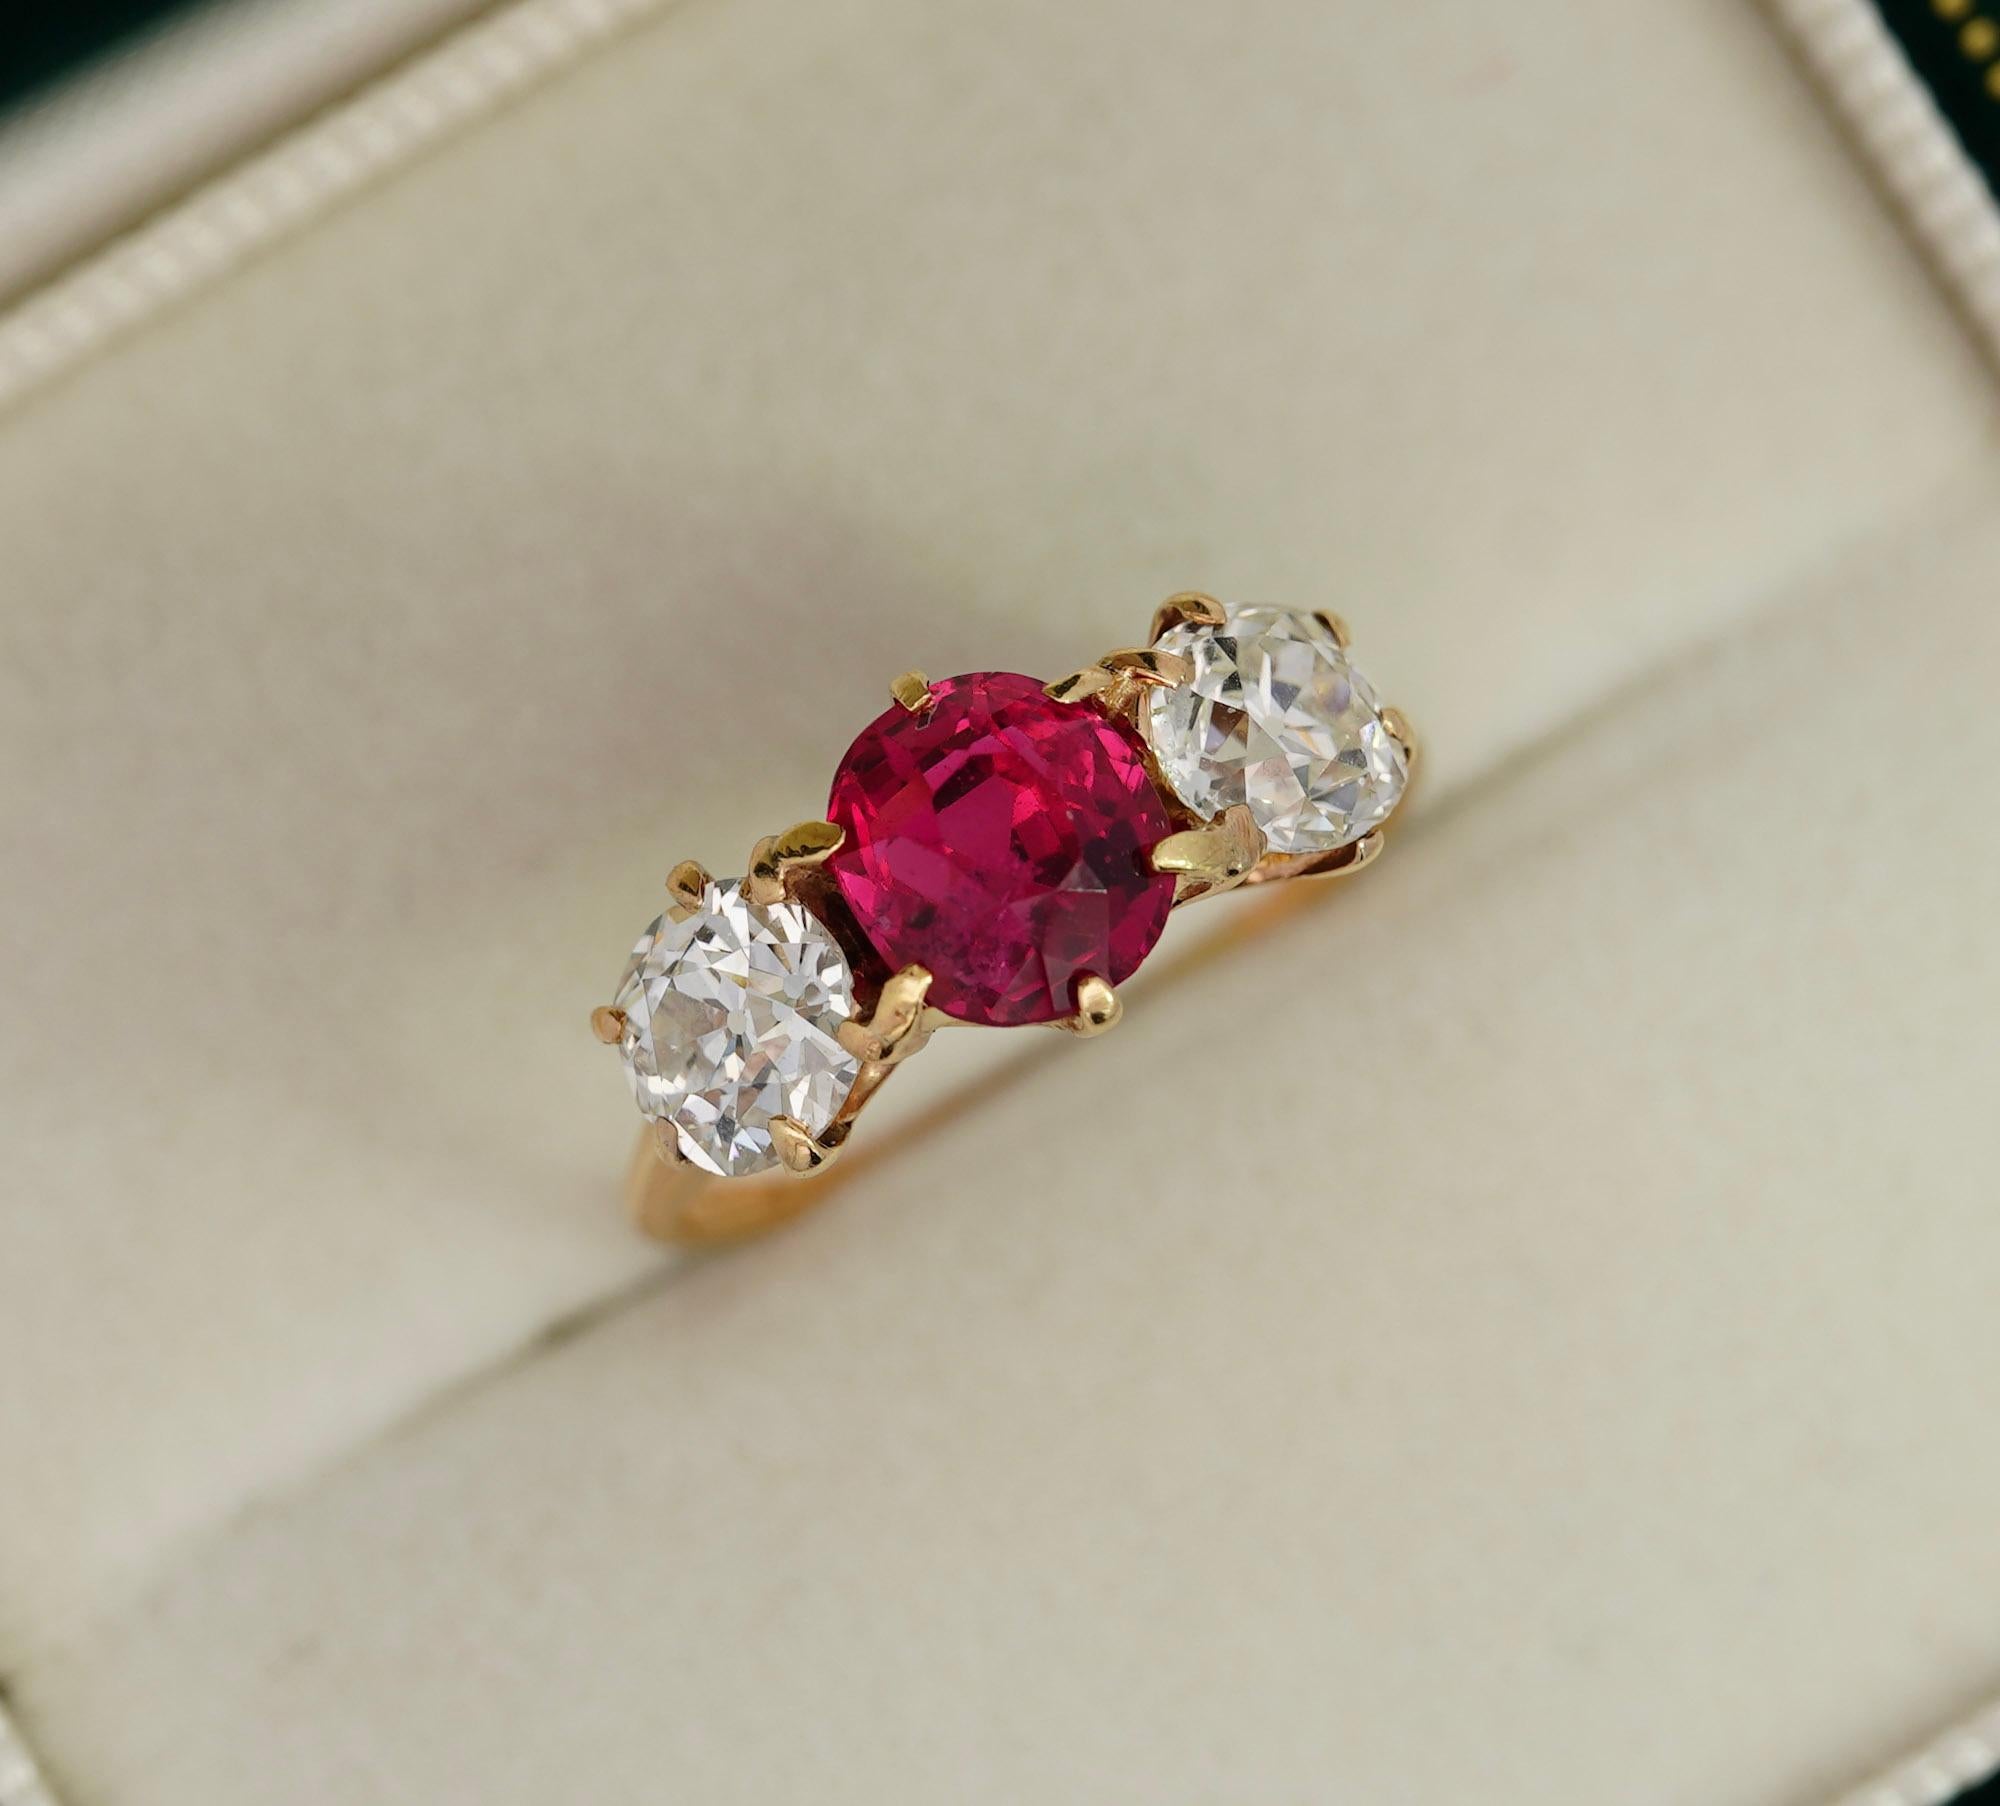 Antique Spinel and Diamond Three Stone Ring. Set with 4 carats total in natural gemstones. 

This antique circa 1920 ring features a vibrant 2.50-carat oval-cut red spinel center stone, paired with additional old mine diamond side stone detailing.